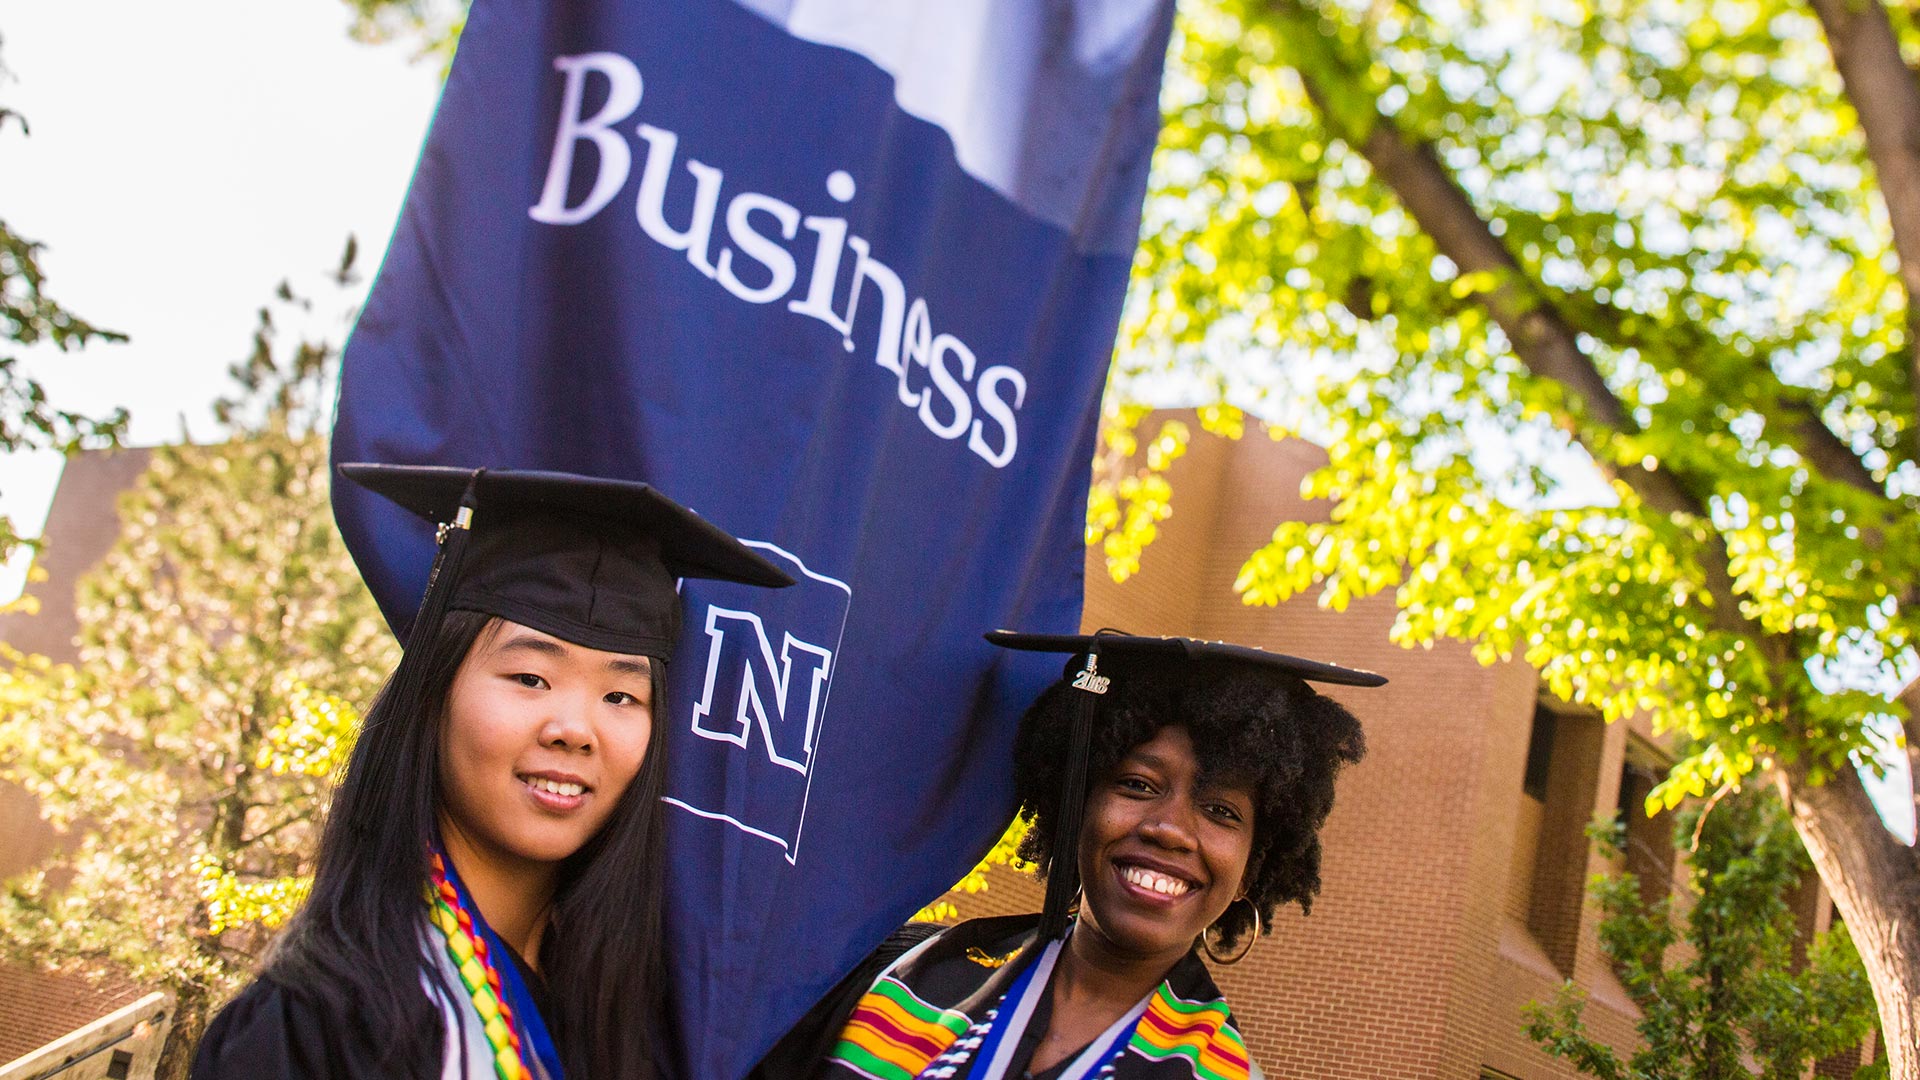 Graduates next to a banner for the College of Business at commencement